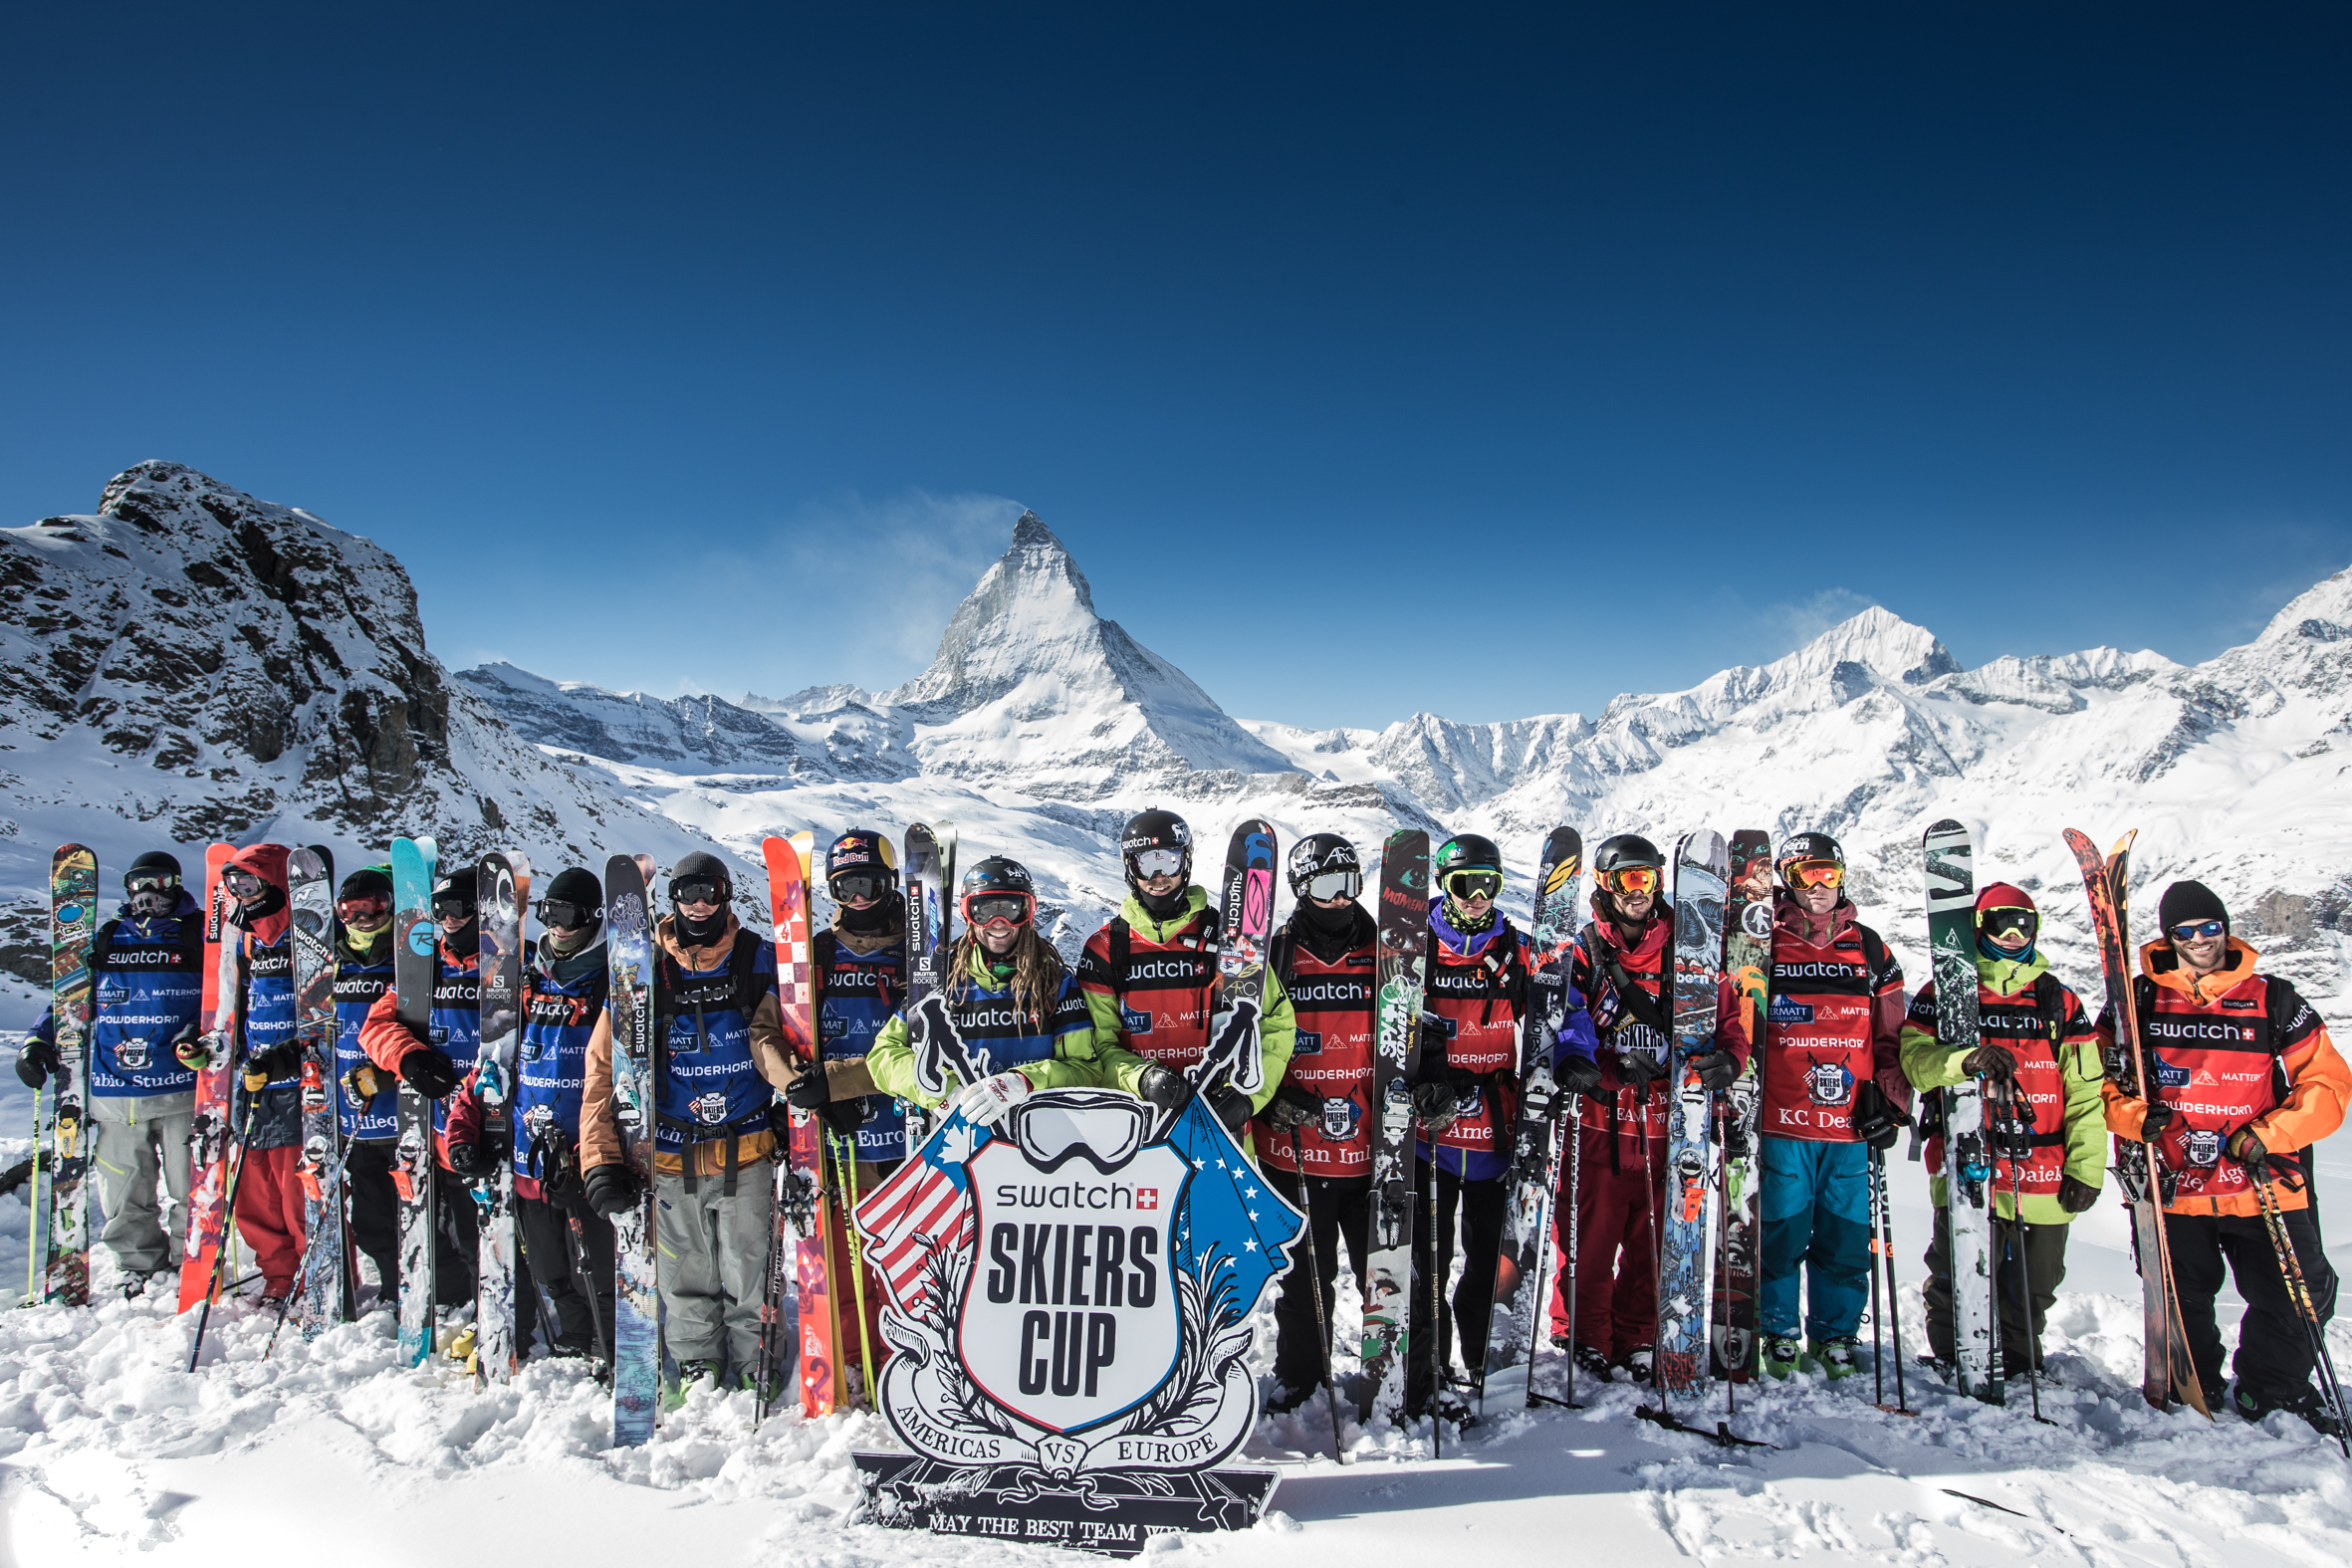 Swatch Skiers Cup 2014